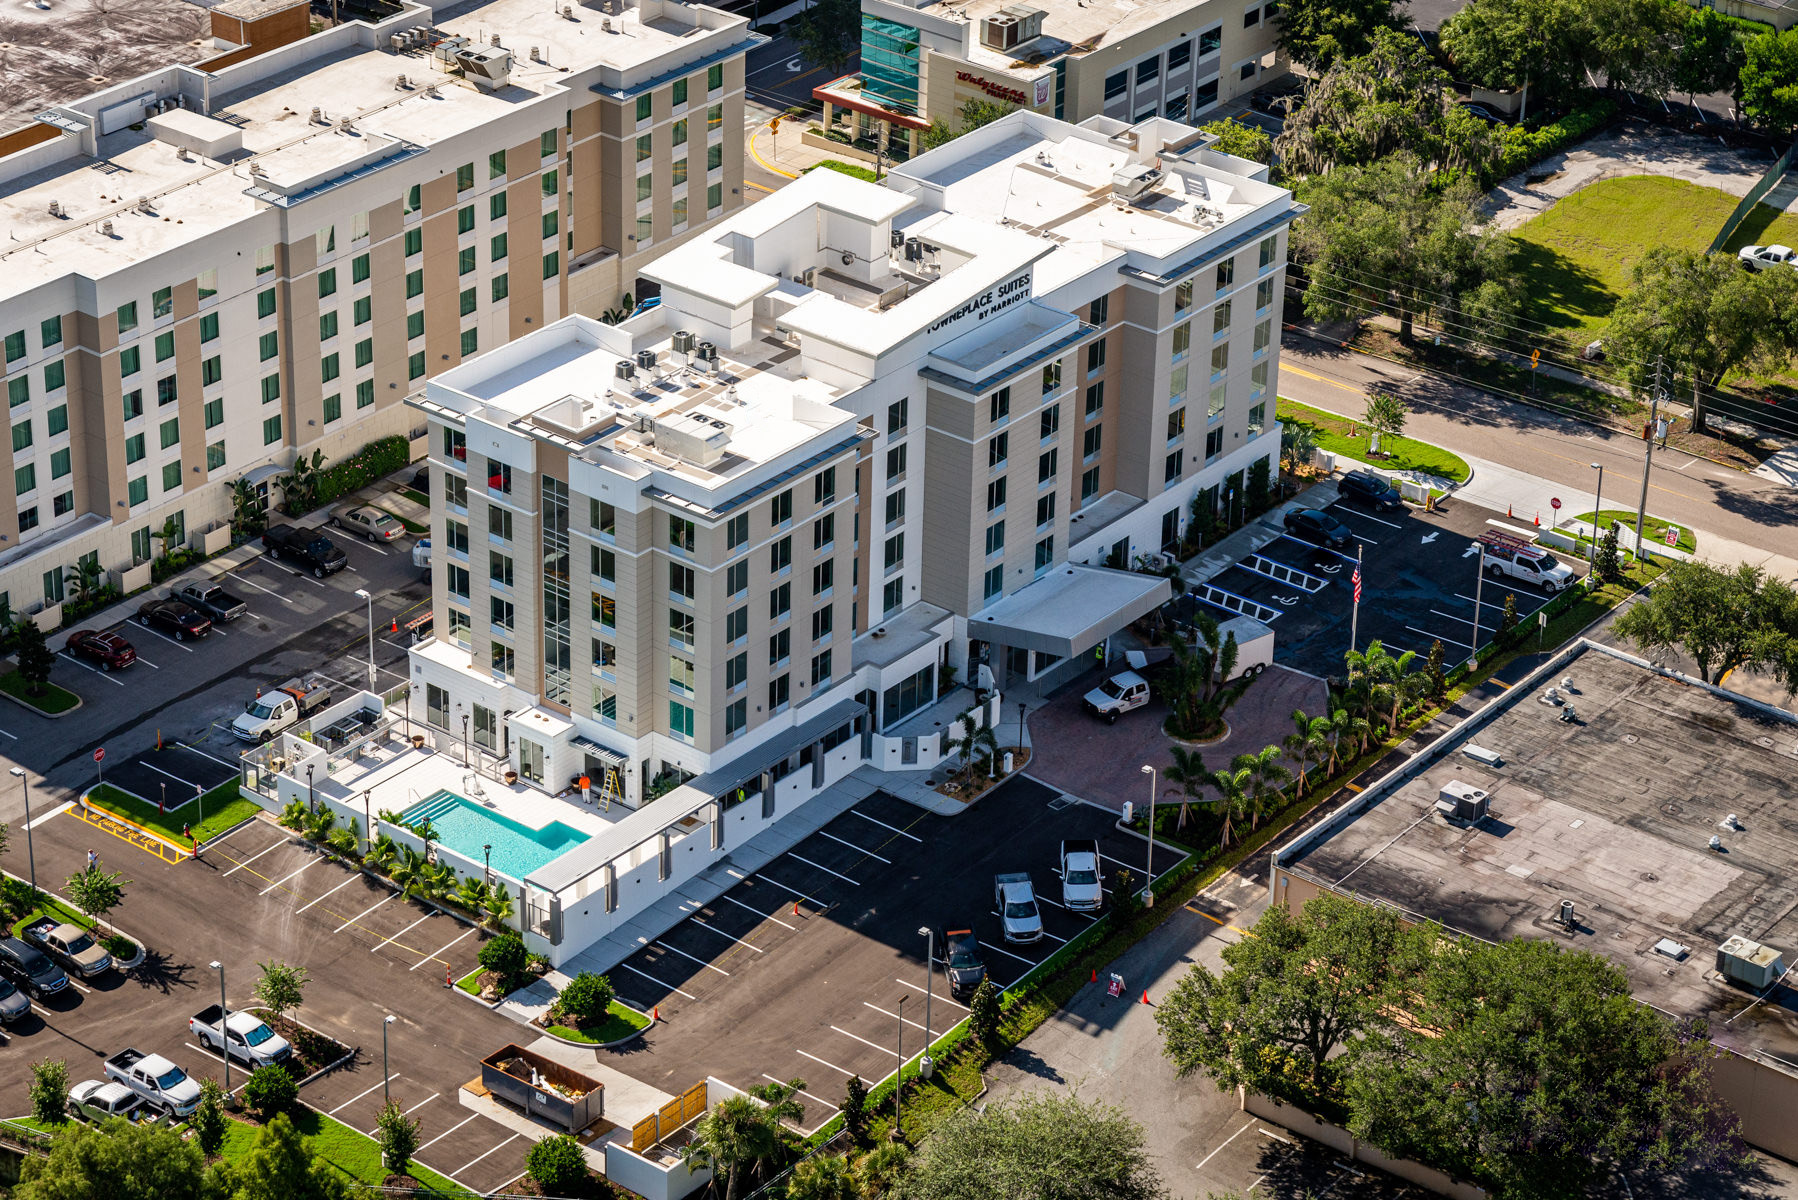 Cleveland Construction Completes New Towneplace Suites in Orlando